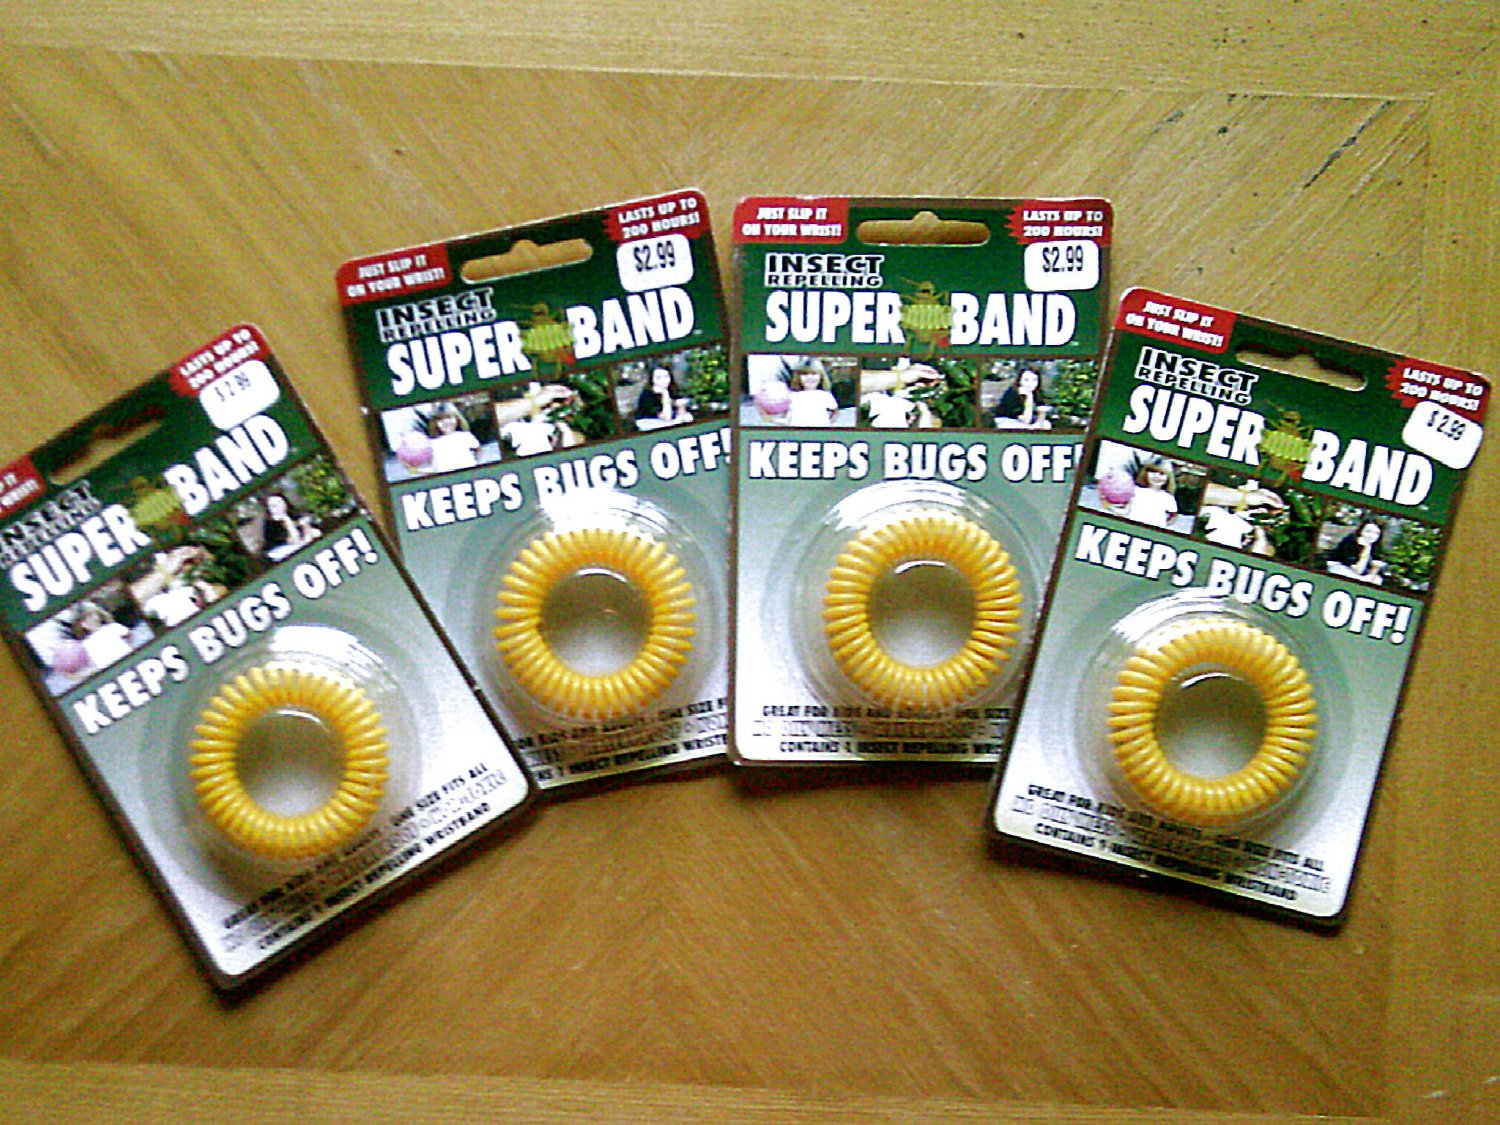 4 New INSECT REPELLING SUPER BAND Wristbands, Keeps Bugs Off, One size fits all